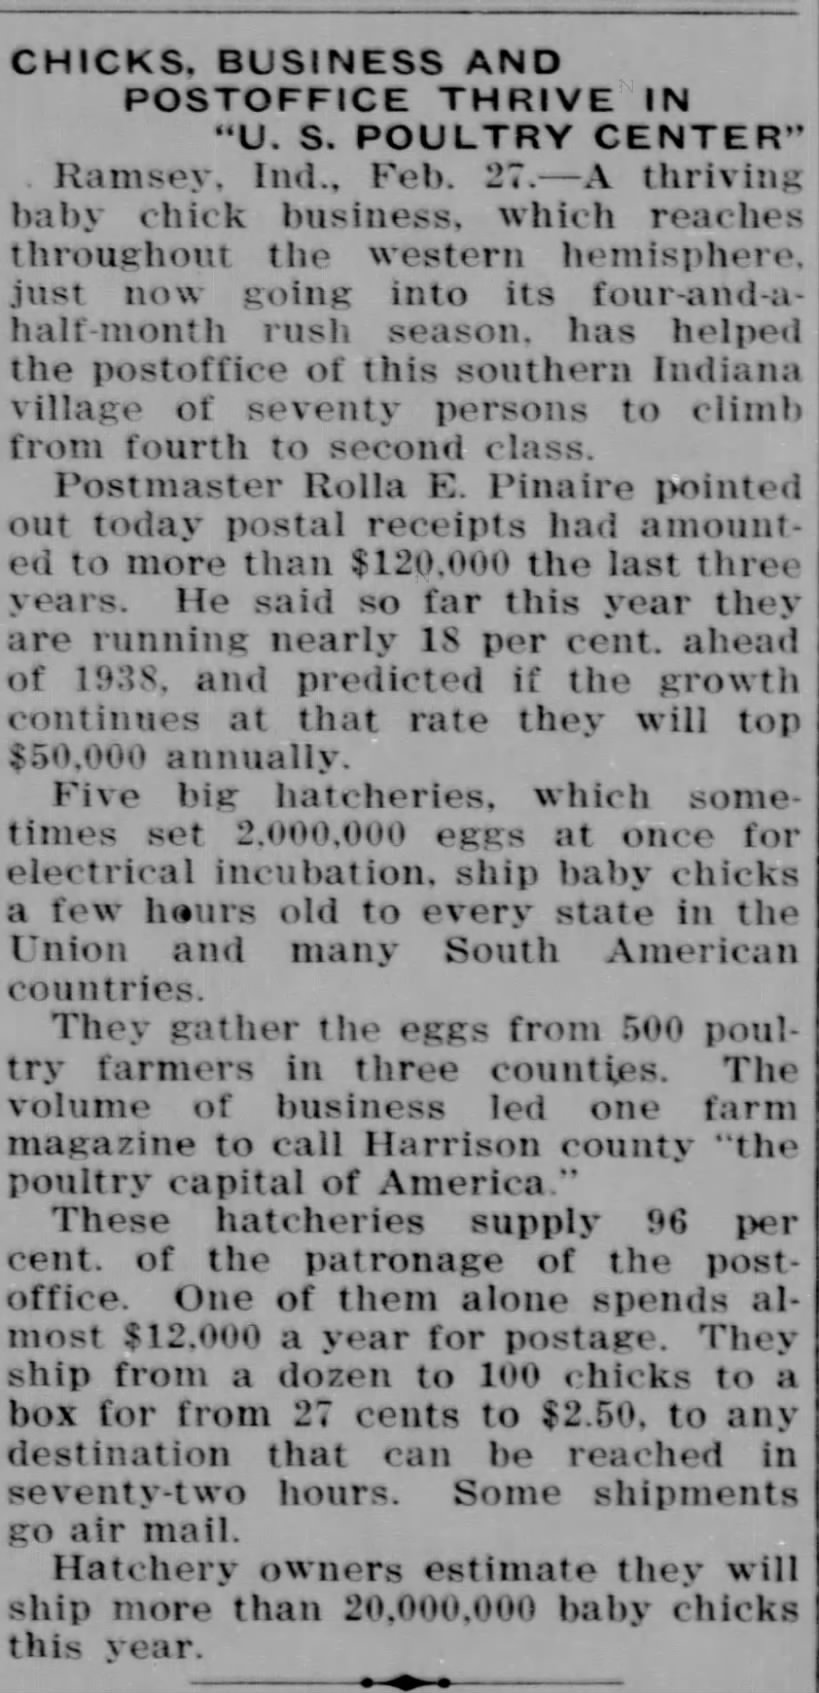 Postmaster Rolla E. Pinaire 2 Mar 1939